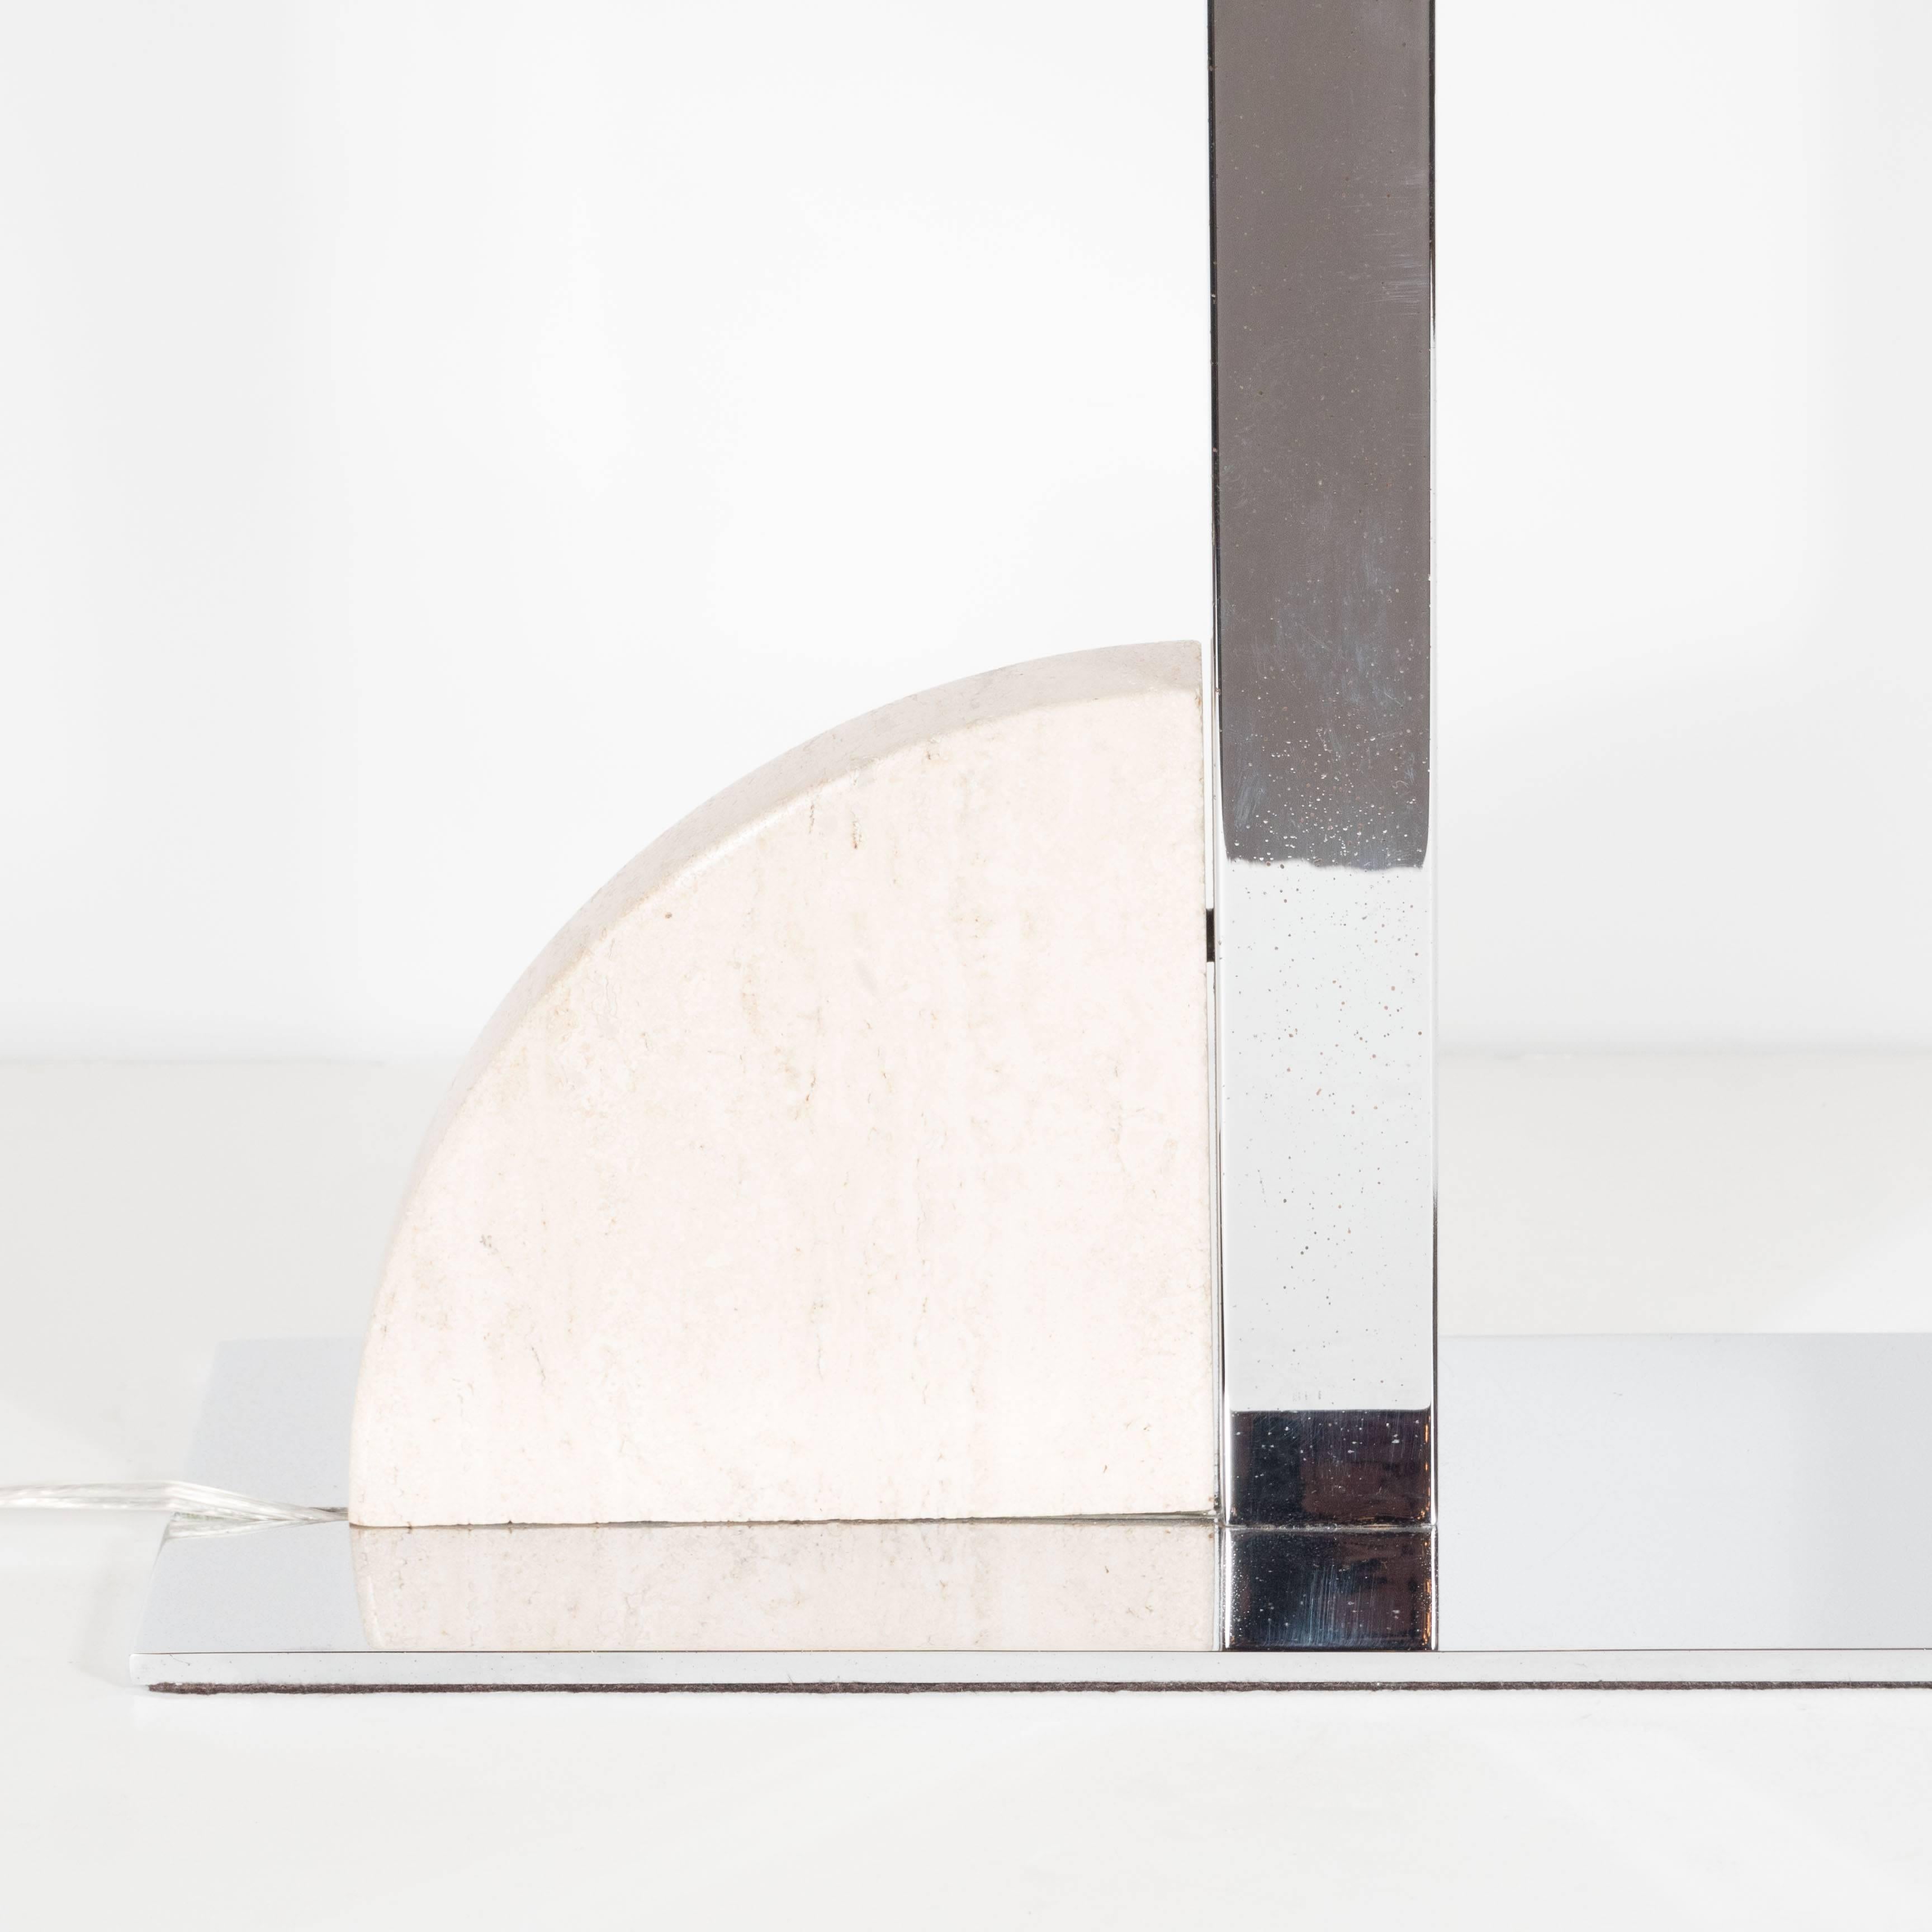 A Mid-Century cantilever chrome and travertine desk or table lamp. A polished flat rectangular base supports an L-shaped rectangular arm. A quarter slice of polished travertine rests on the piece. A two-way switch for differing intensities of light